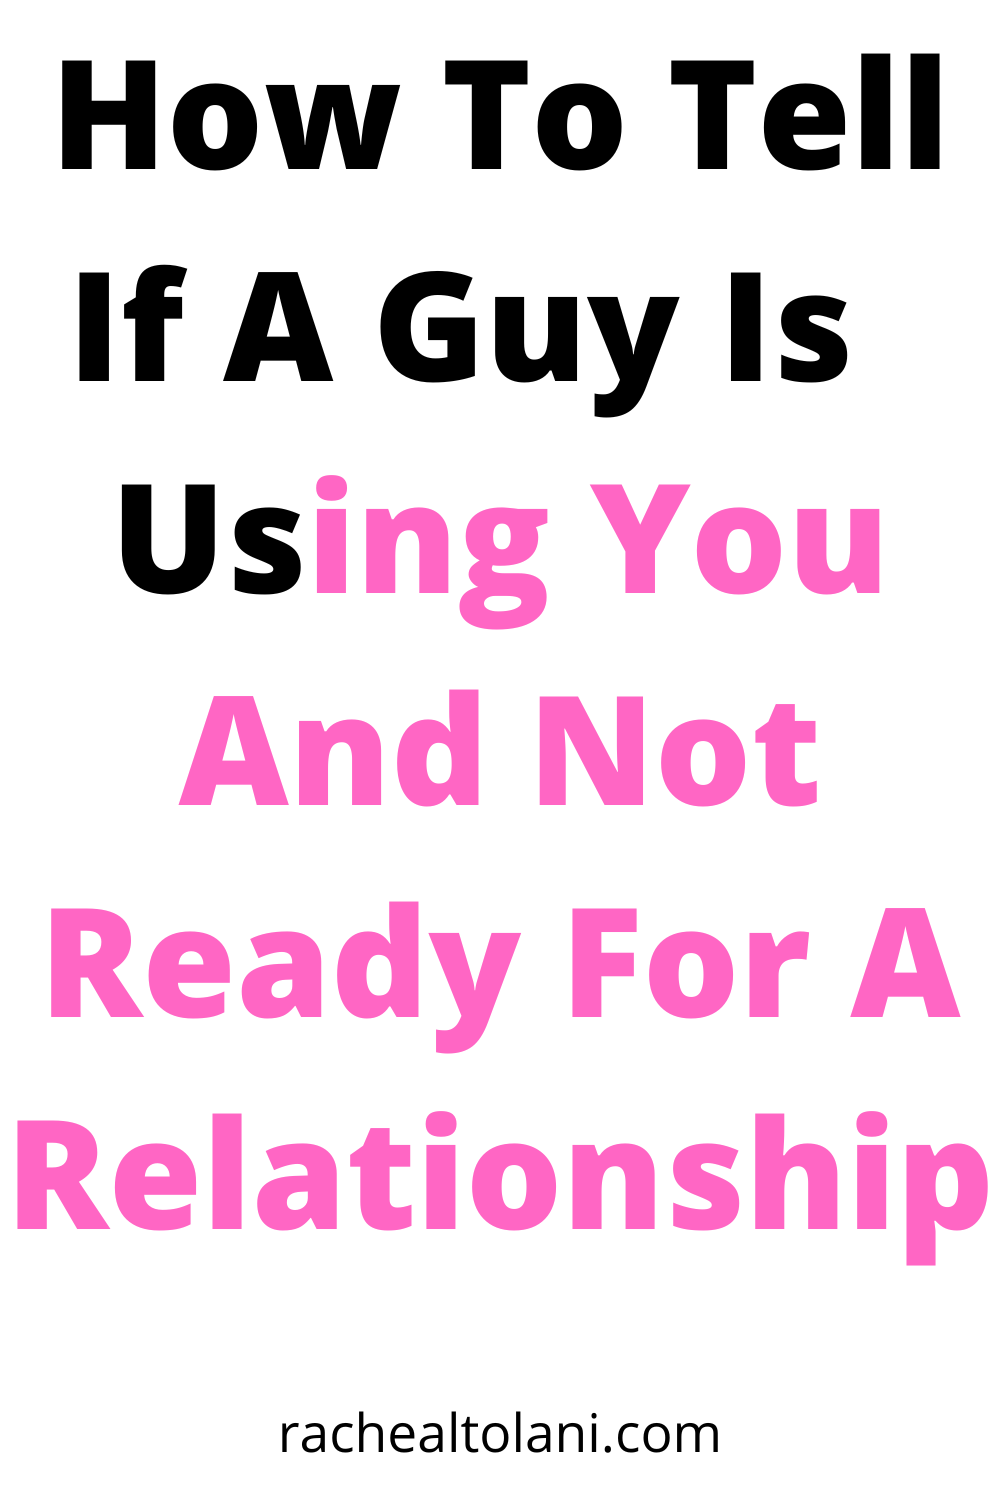 How to tell if a guy is using you